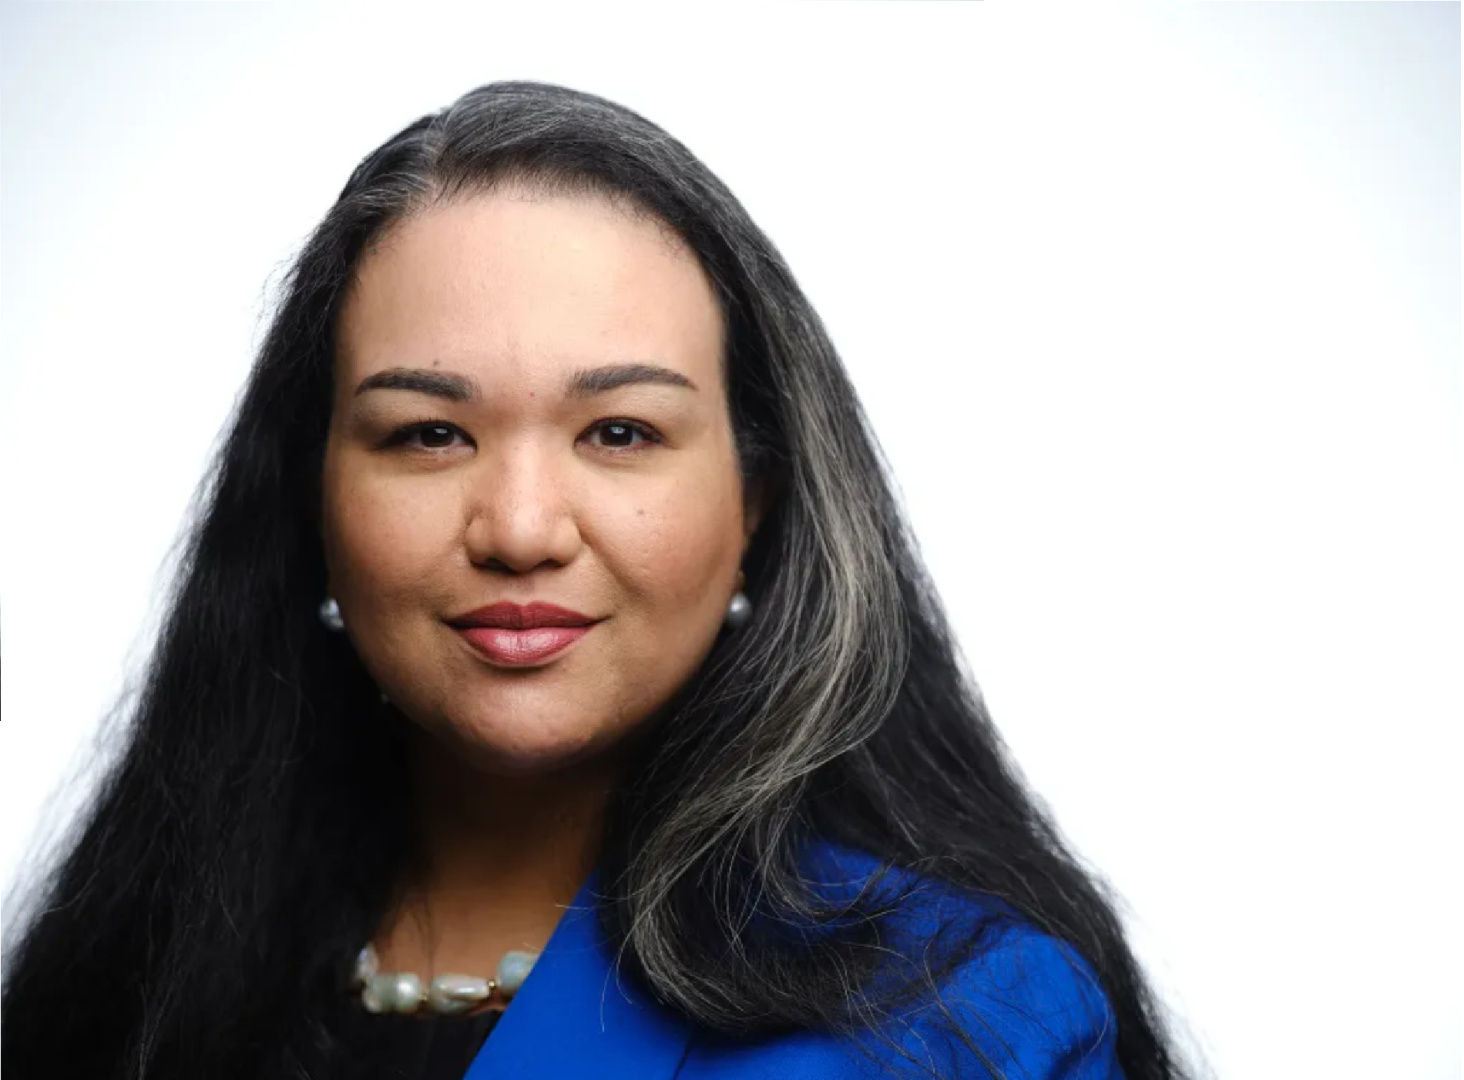 Harrisburg council member and immigration lawyer Shamaine Daniels will face off with Rep. Scott Perry for the U.S. House Seat representing PA-10. (Image courtesy of Shamaine Daniels)